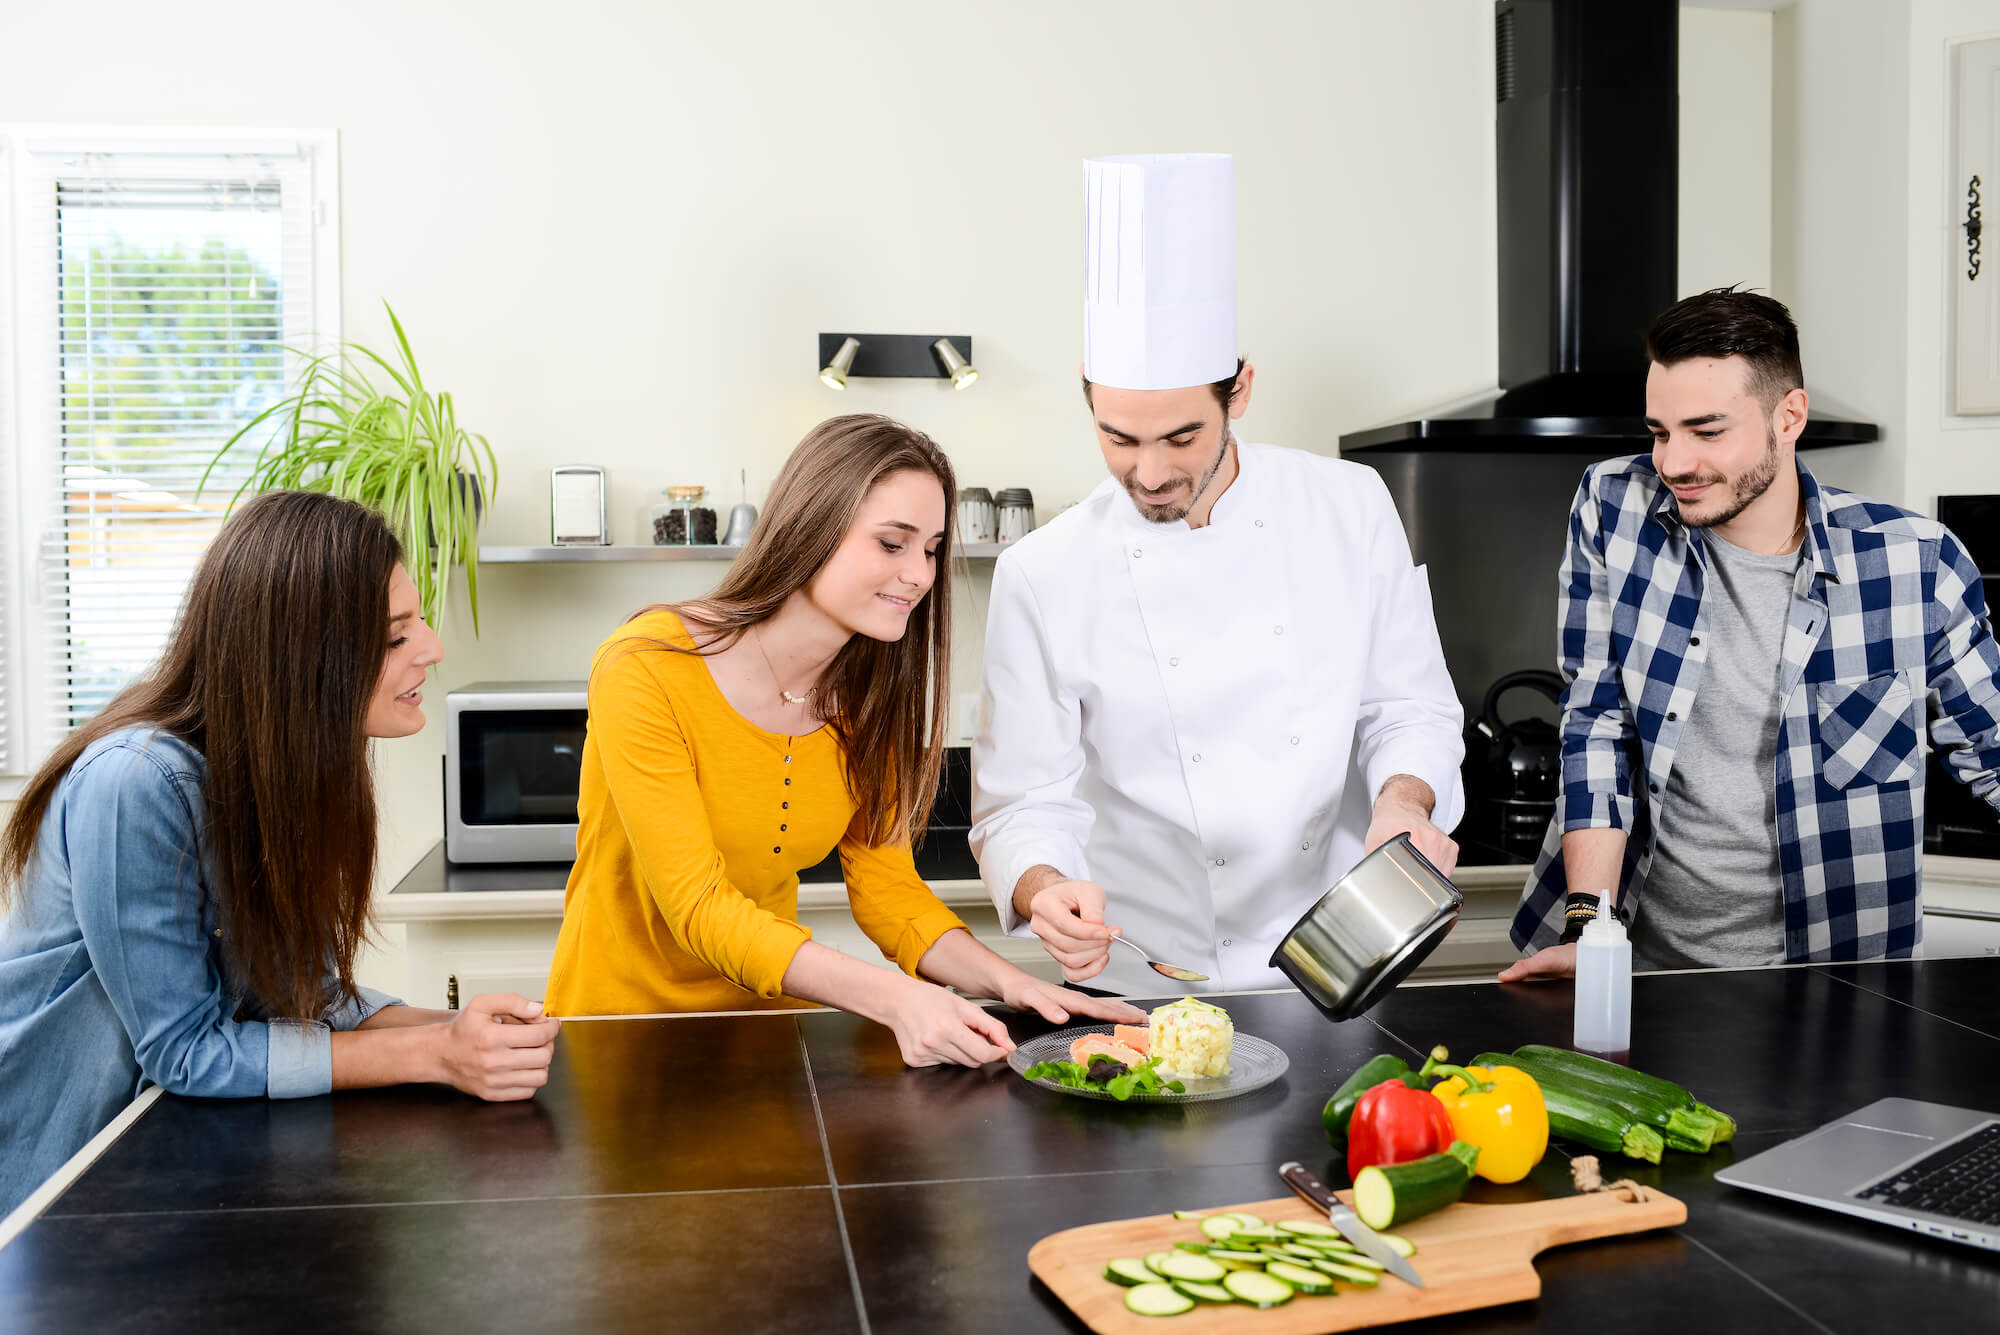 Fort Lauderdale personal chef - private cook services, hire a personal chef Fort Lauderdale, personal chef jobs fort lauderdale